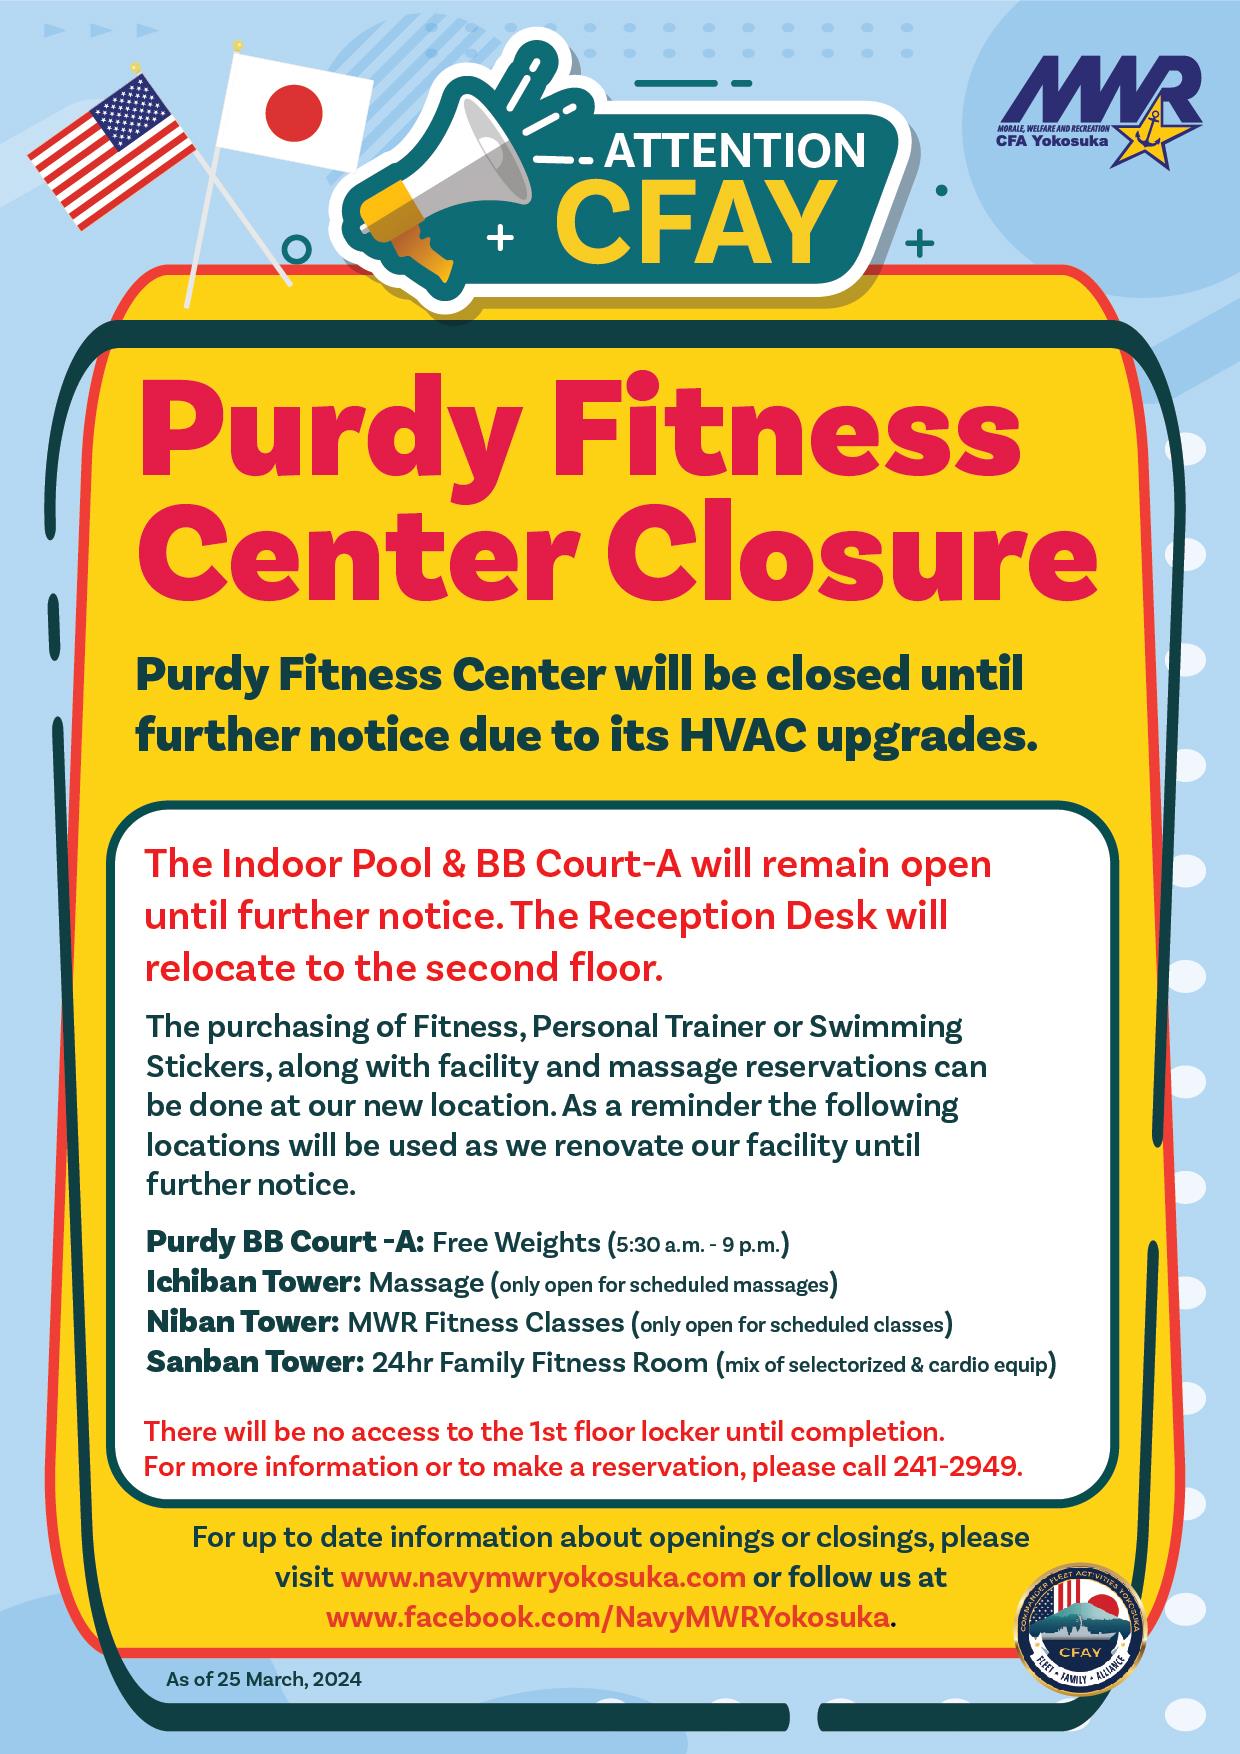 Purdy Fitness Center Closure